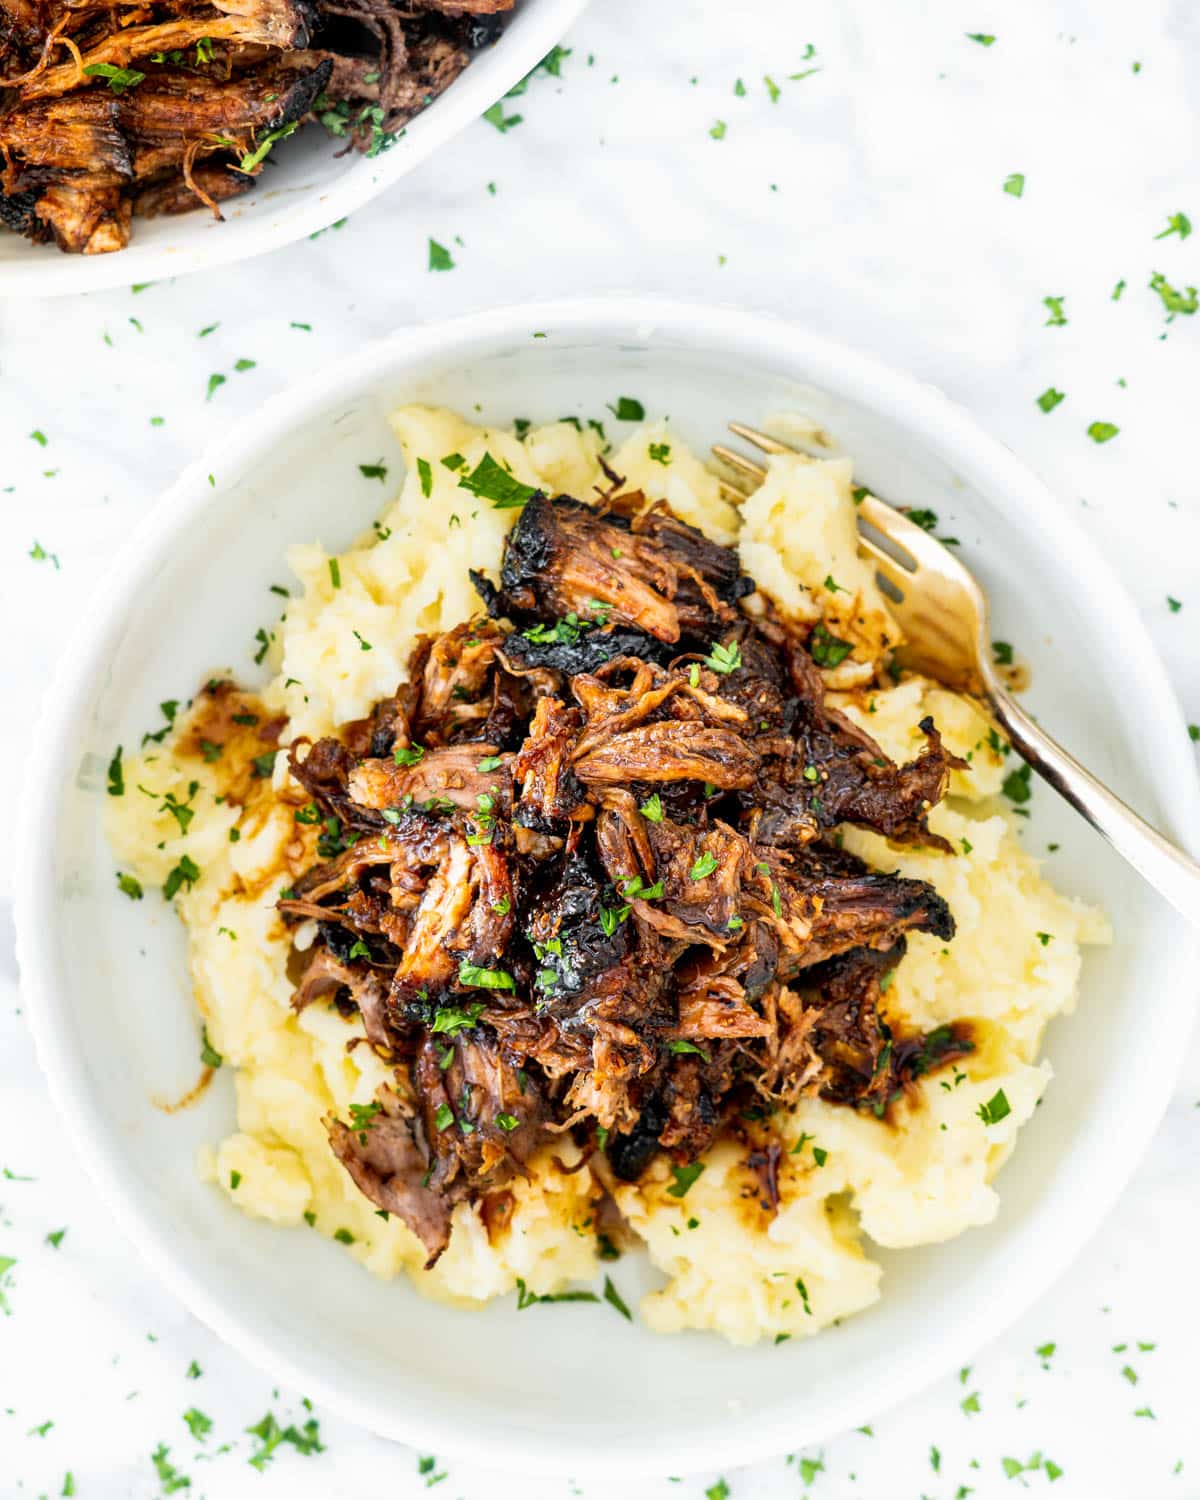 mashed potatoes with pulled pork in a white bowl